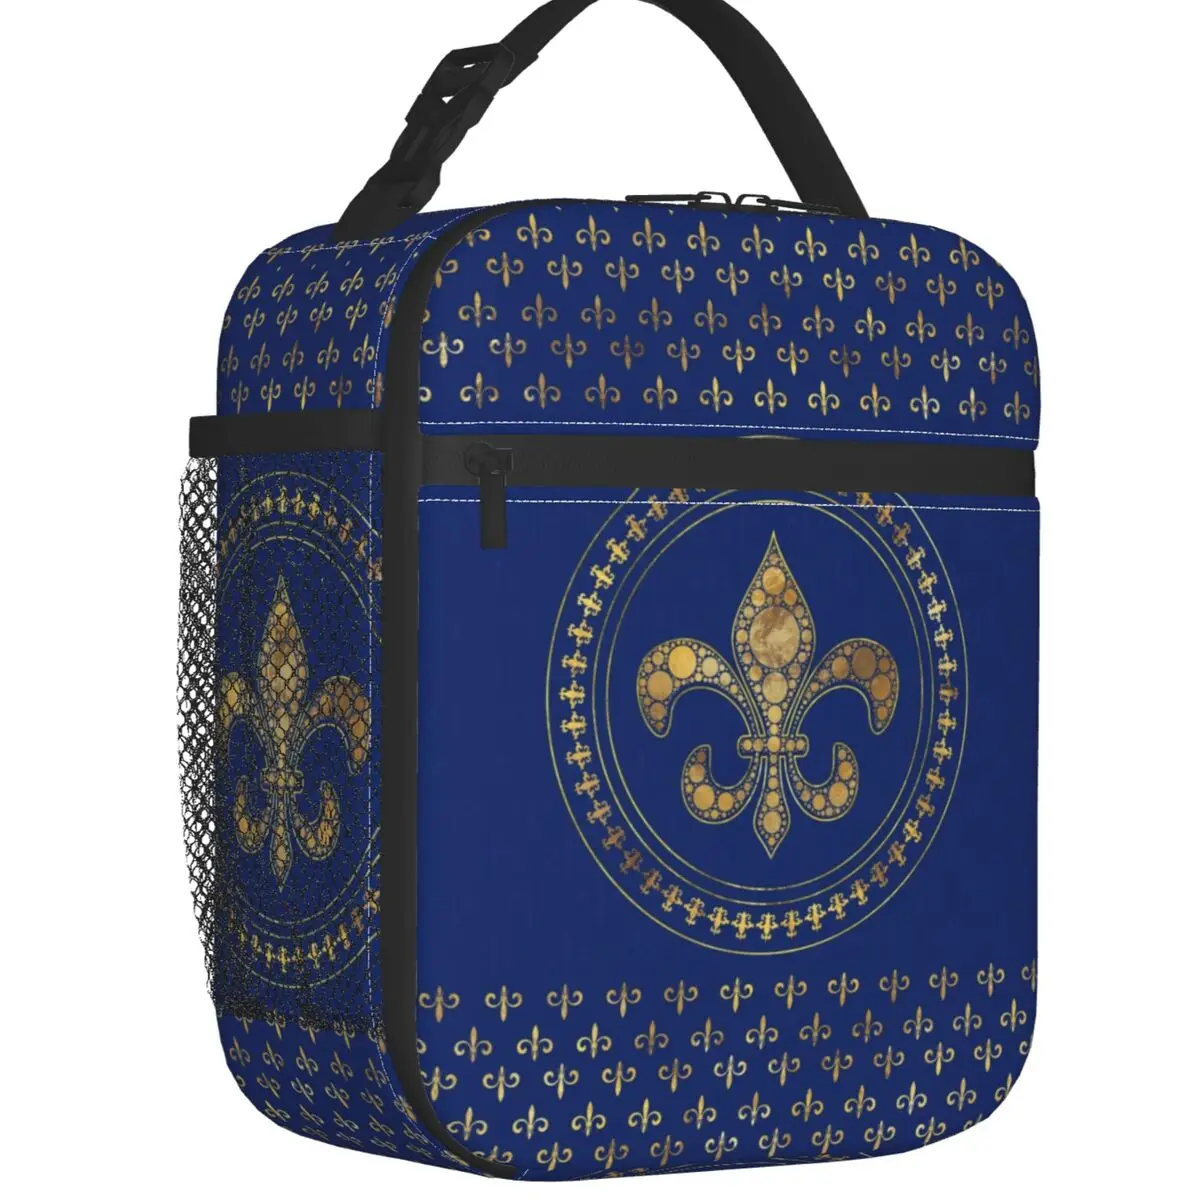 Fleur De Lys Lily Flower Gold And Royal Blue Insulated Lunch Bags for Camping Travel Cooler Thermal Bento Box Women Children